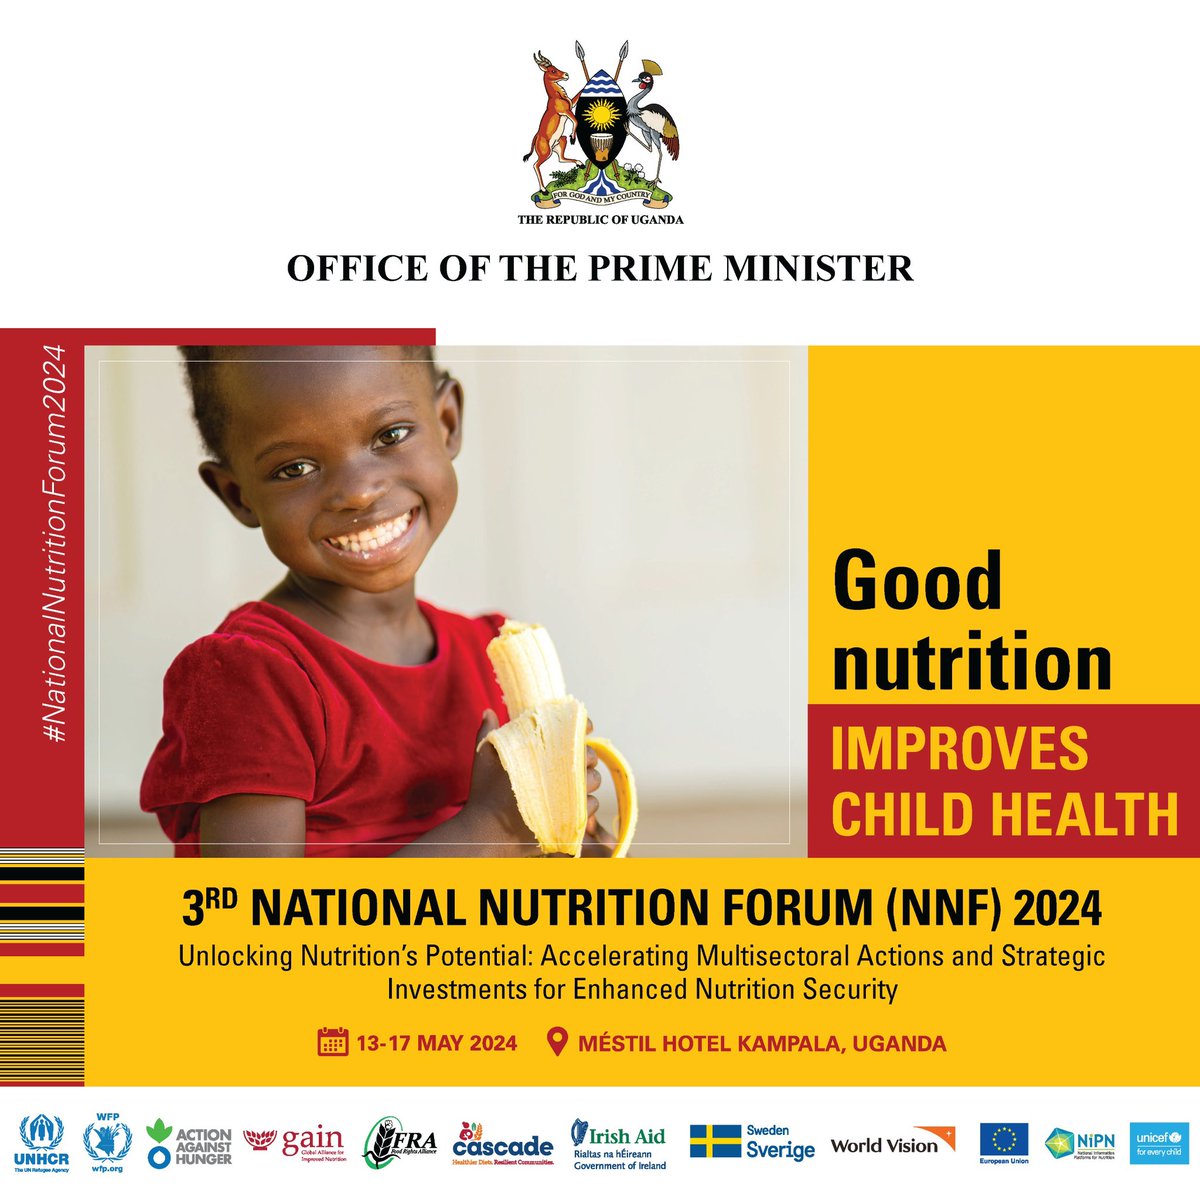 The 3rd National Nutrition Forum (NNF) 2024 will focus on enhancing nutrition security through multisectoral actions and strategic investments. @OPMUganda @UNICEFUganda #NationalNutritionForum2024